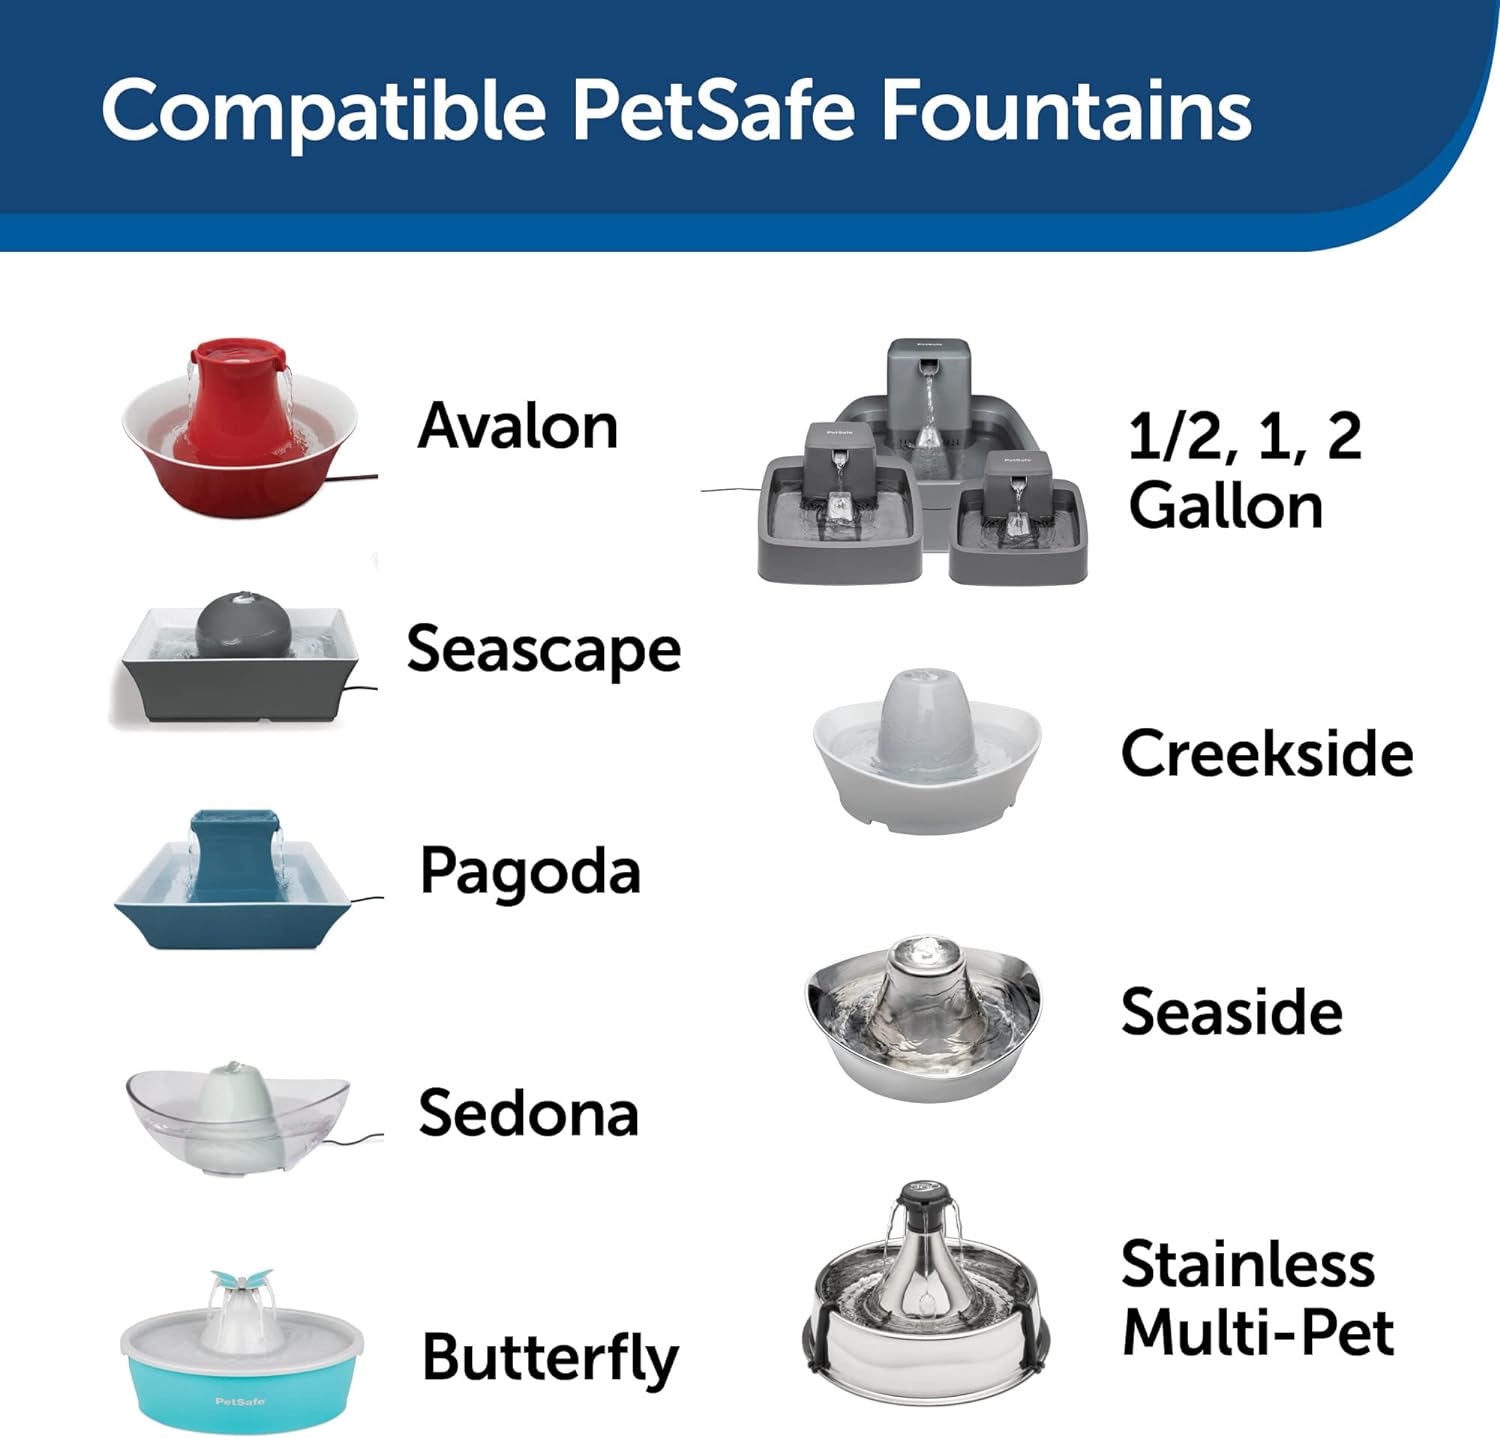 PetSafe Drinkwell Replacement Foam Filters - 2 Count Pack, Compatible with Ceramic and Stainless Steel Pet Fountains, PAC00-13711, White